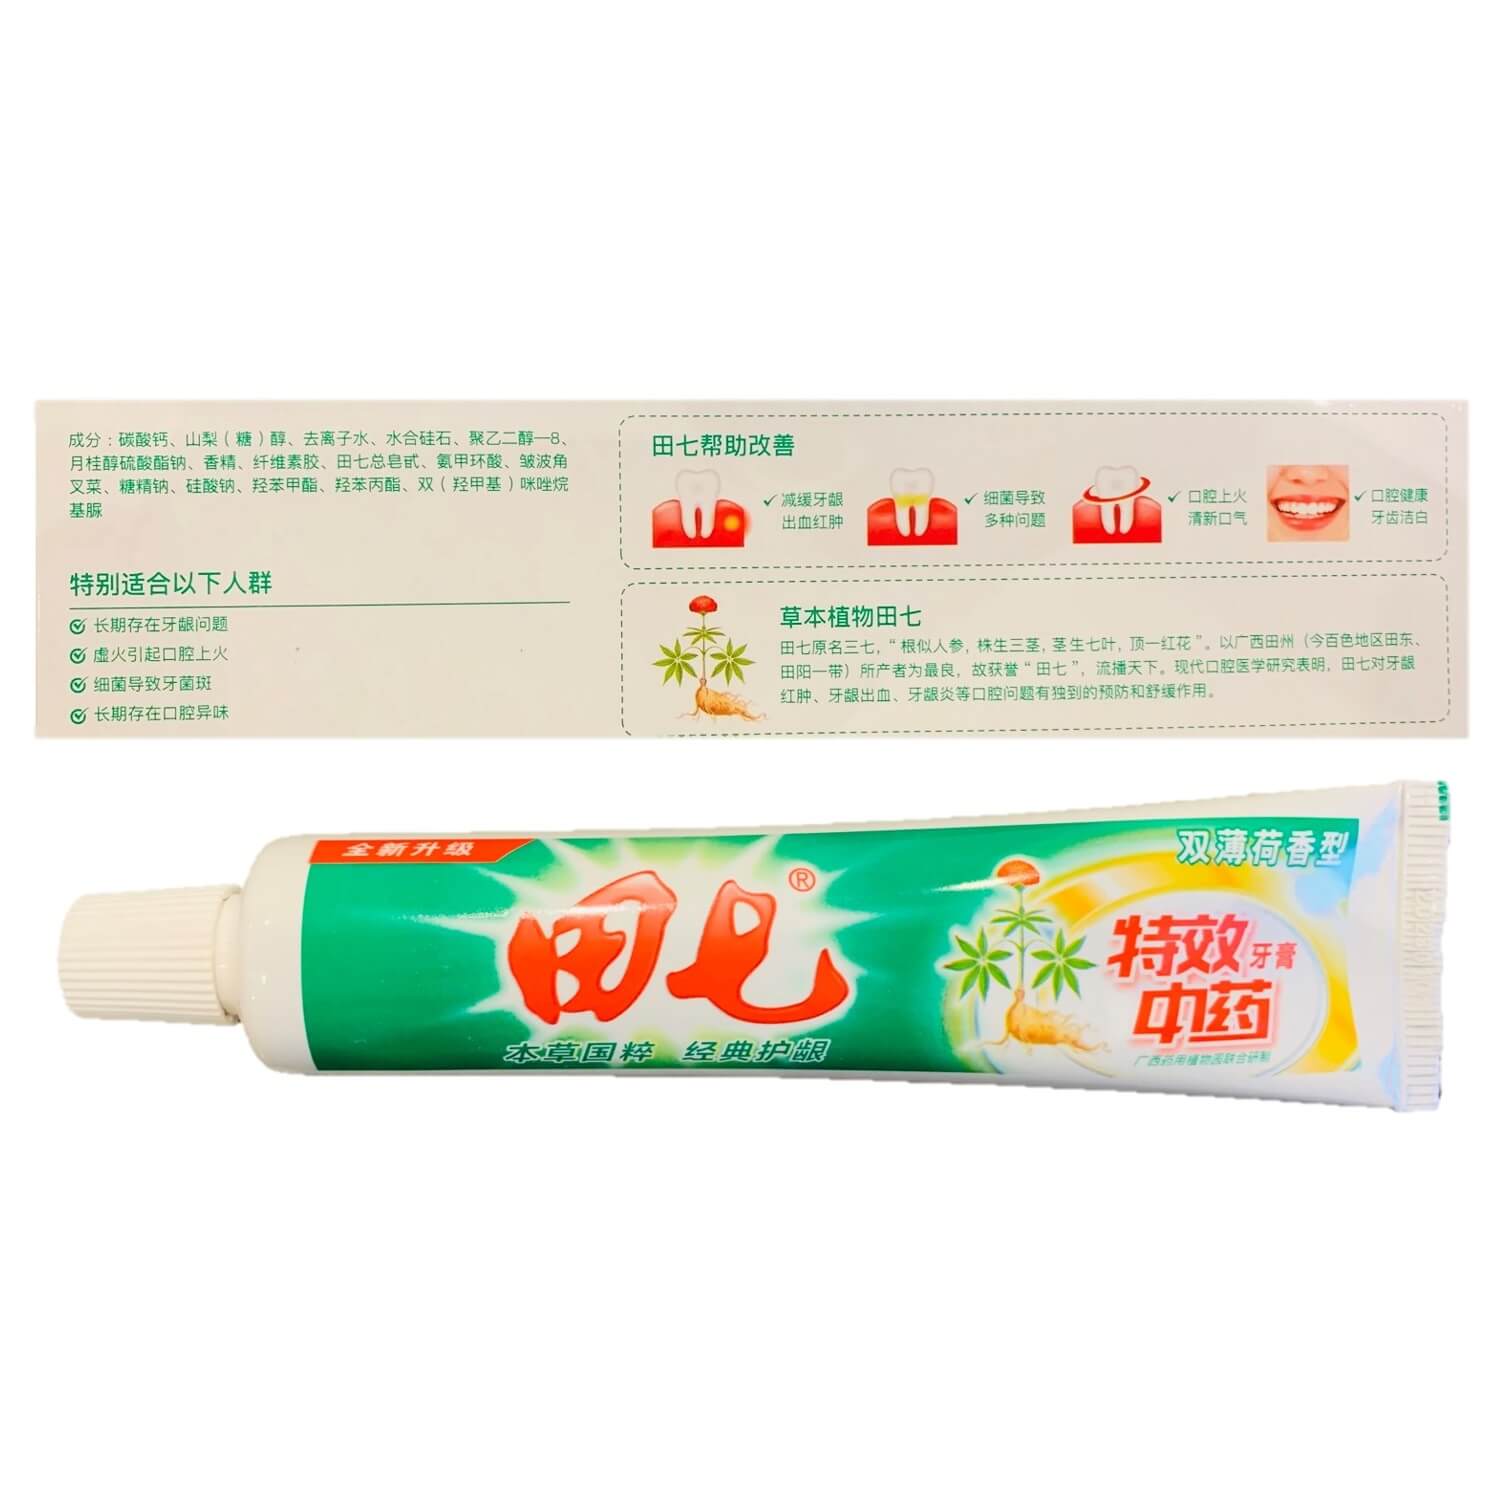 Tienchi, Herbal Notoginseng Toothpaste, Mint Flavor (100g) - 6 Boxes - Buy at New Green Nutrition